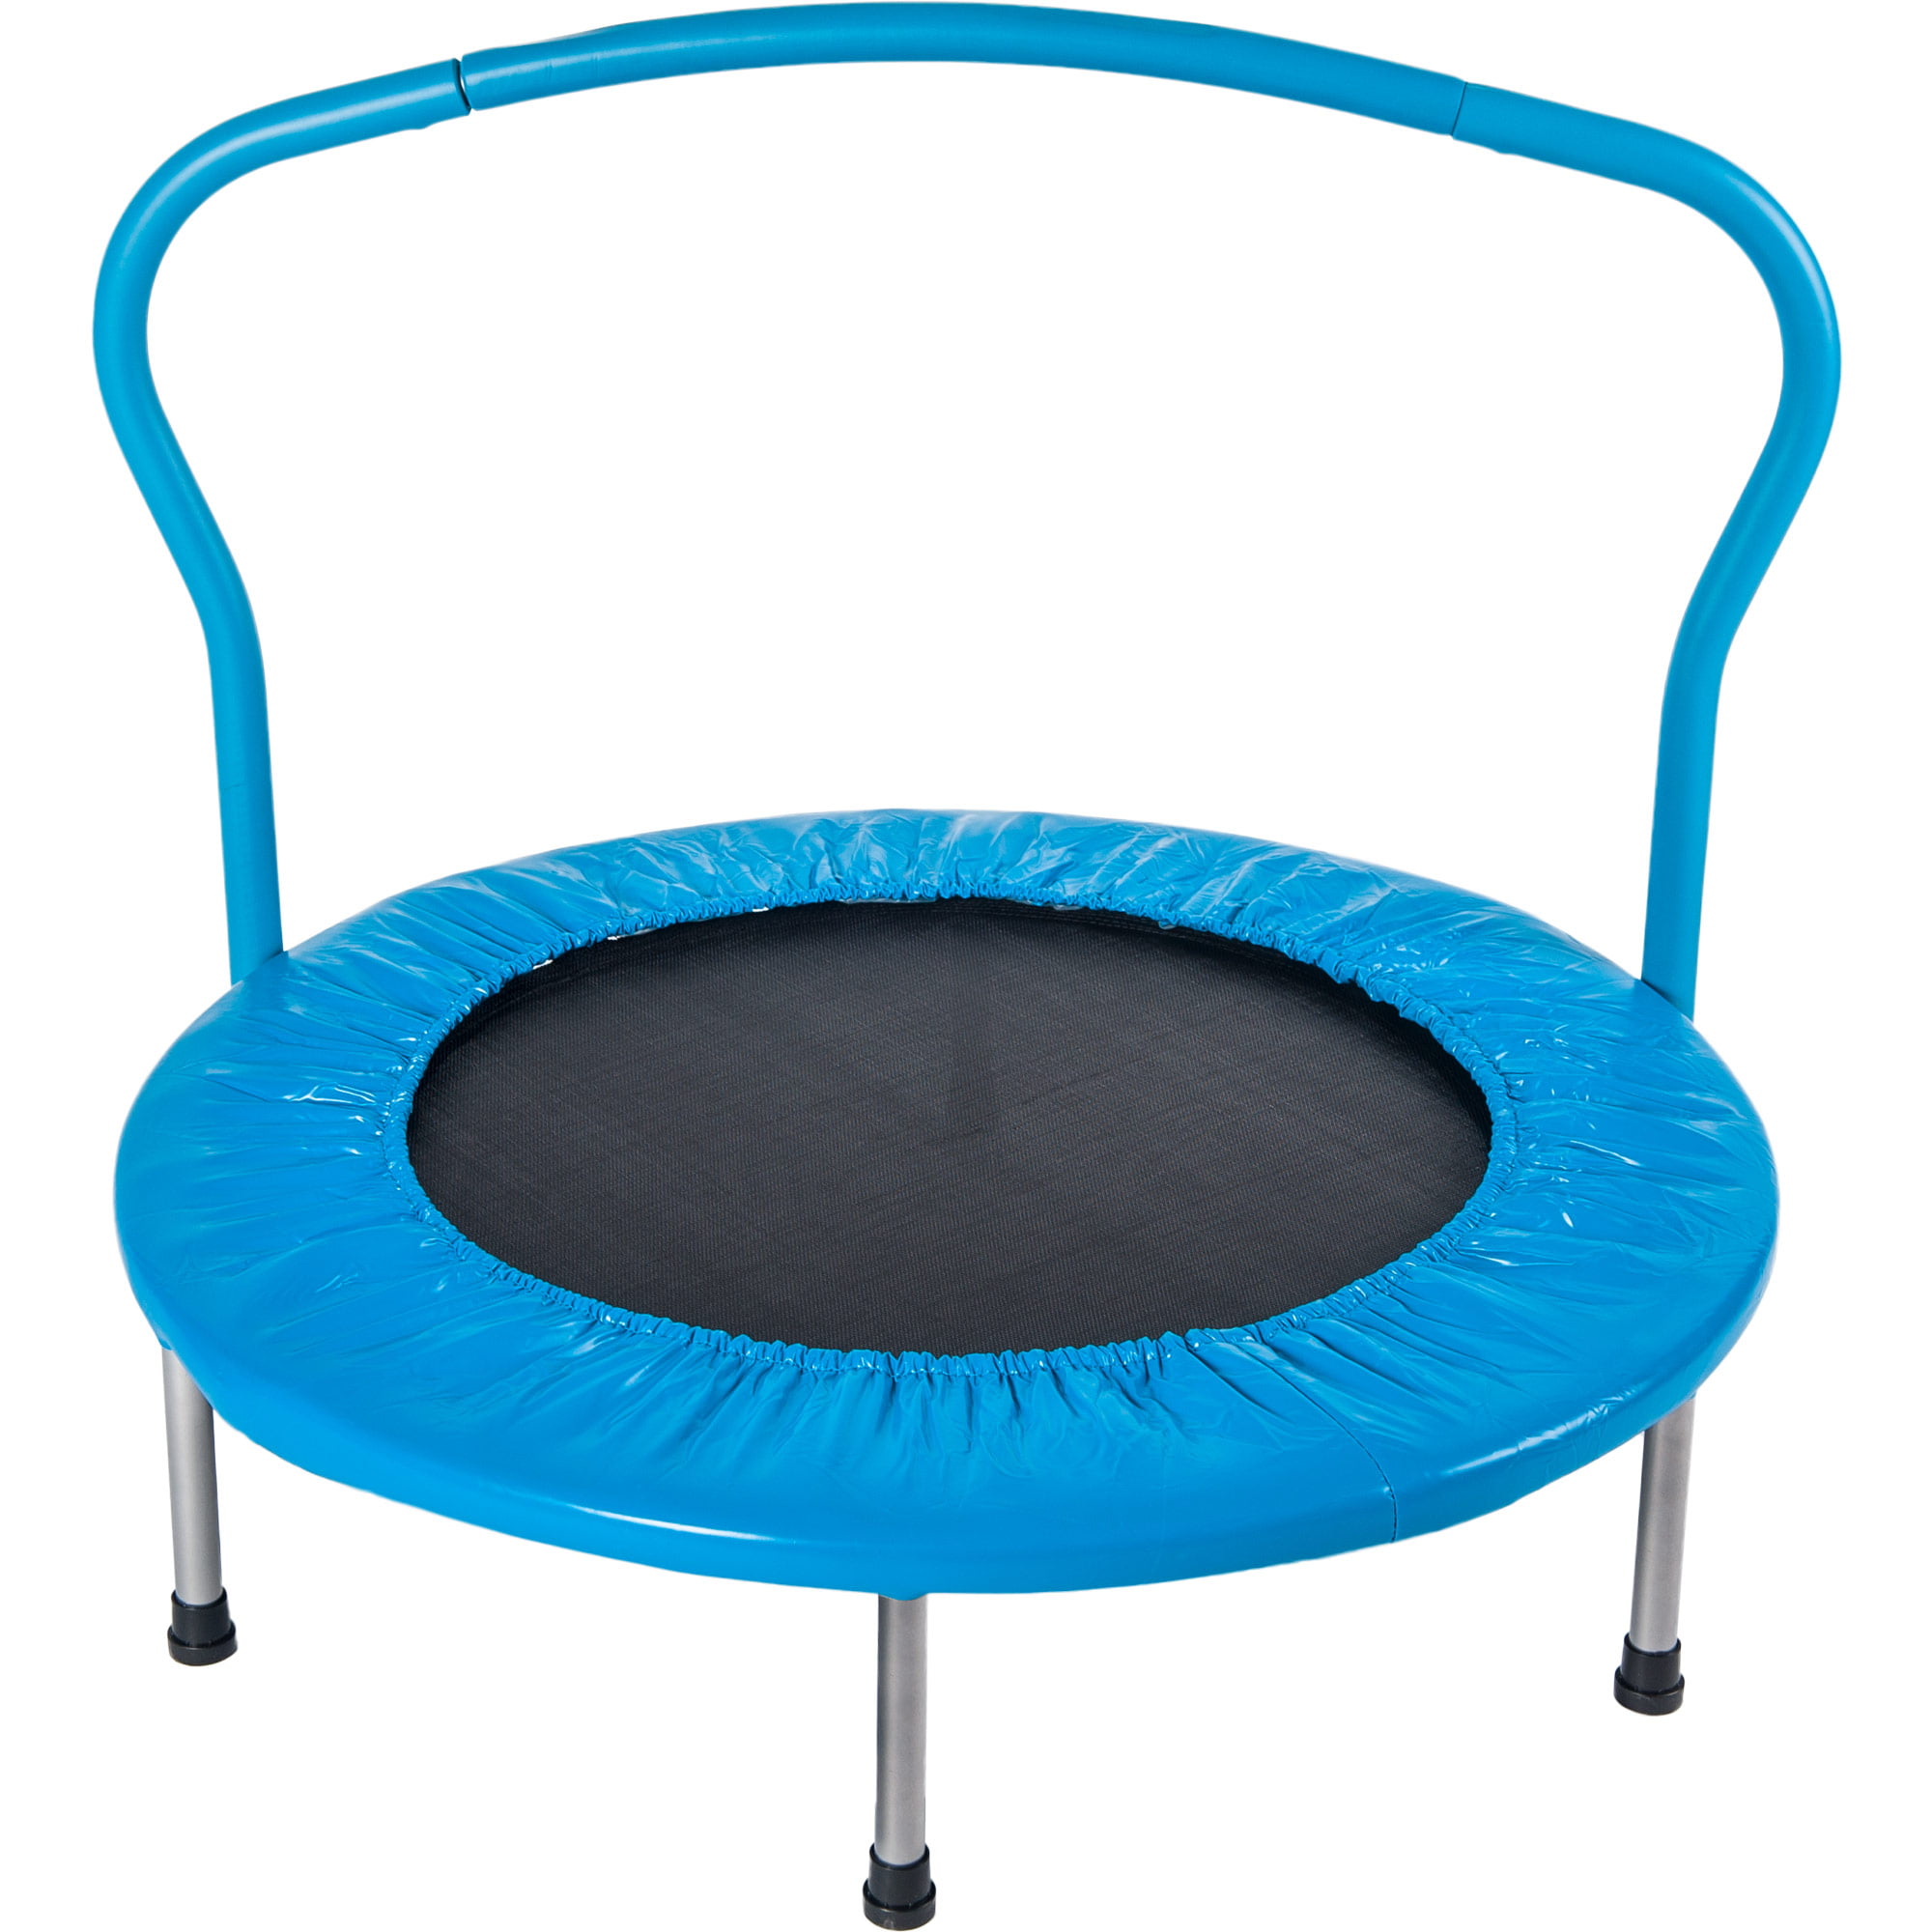 36-Inch Kids Trampoline Little Trampoline with Handrail and Safety